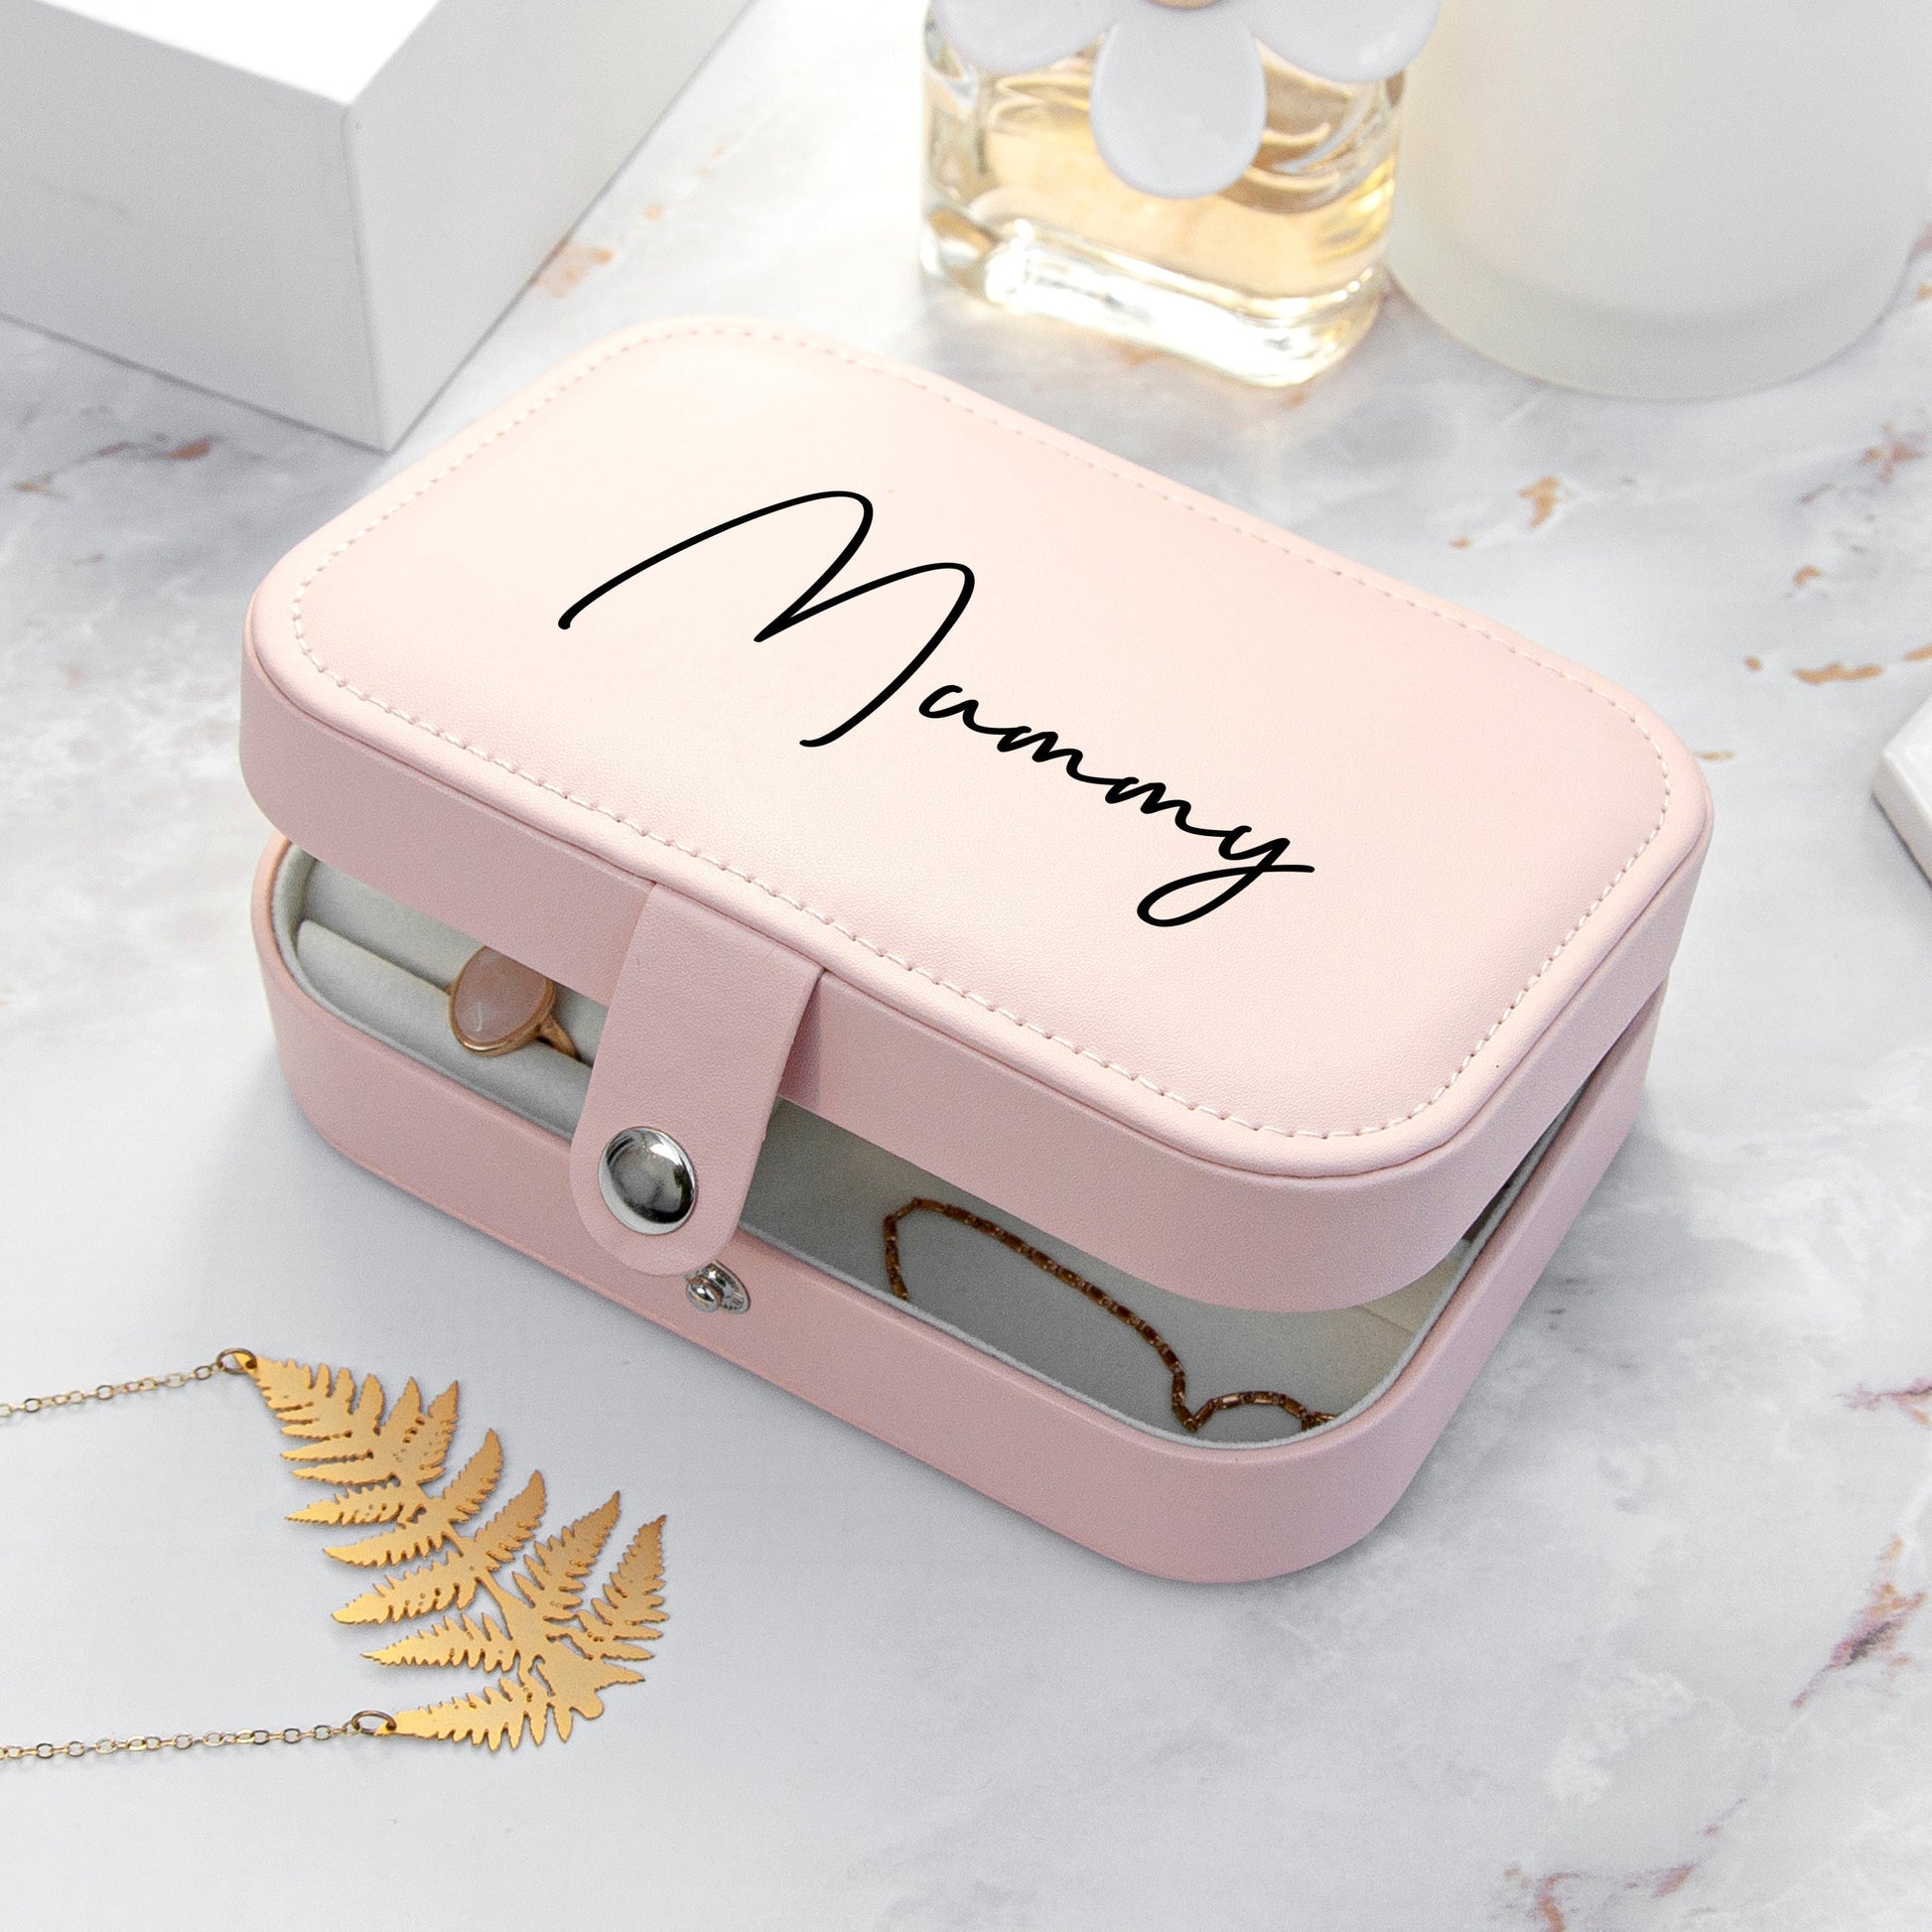 Personalized Jewellery Boxes & Storage - Personalized Travel Jewellery Case 